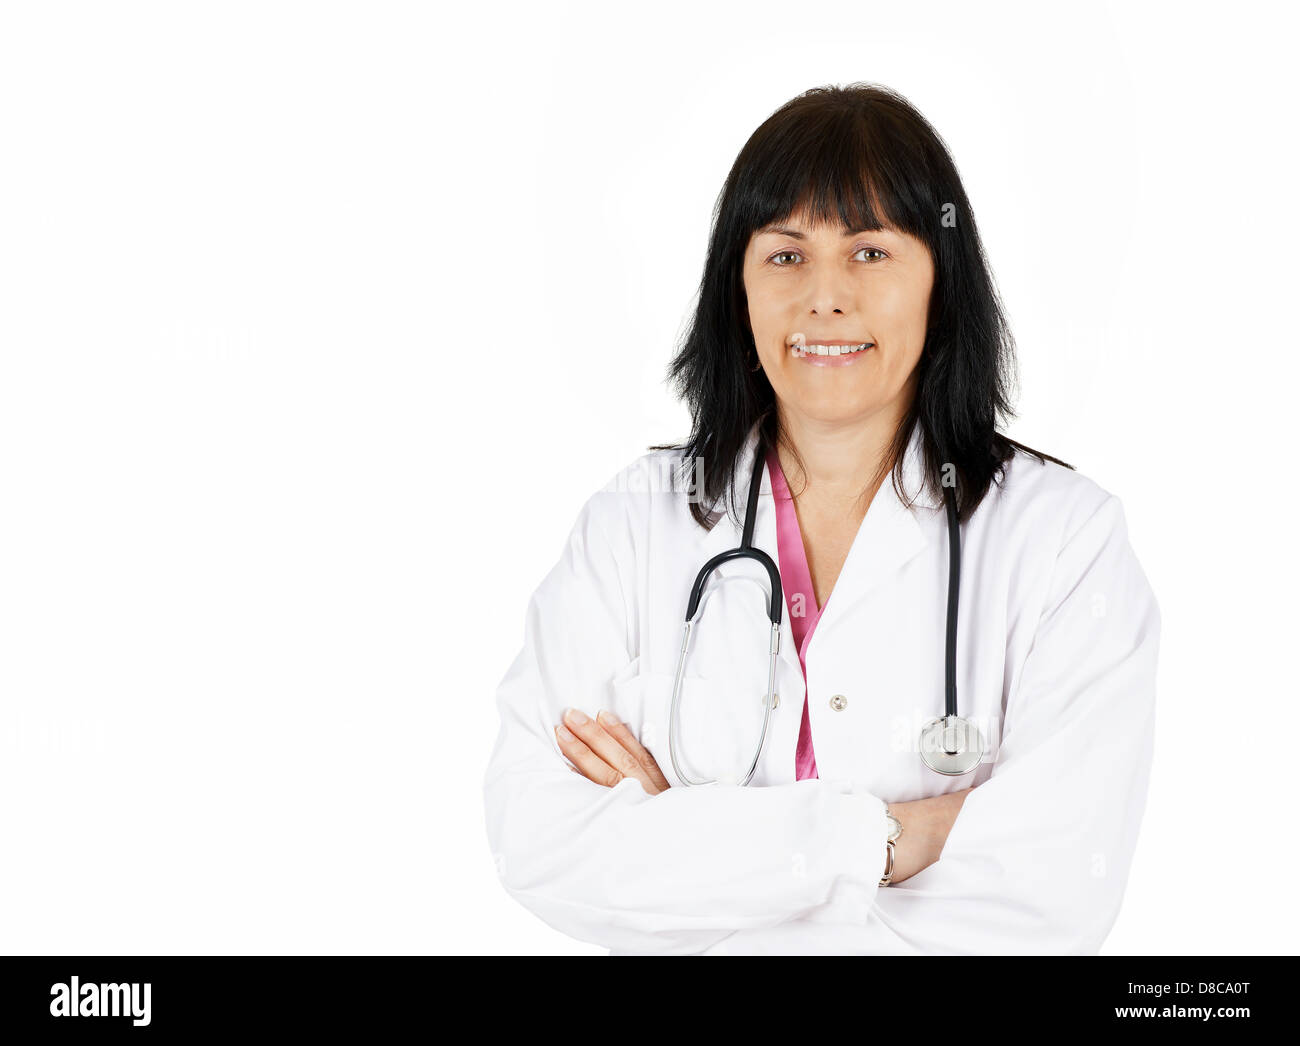 Friendly woman doctor smiling on white Stock Photo